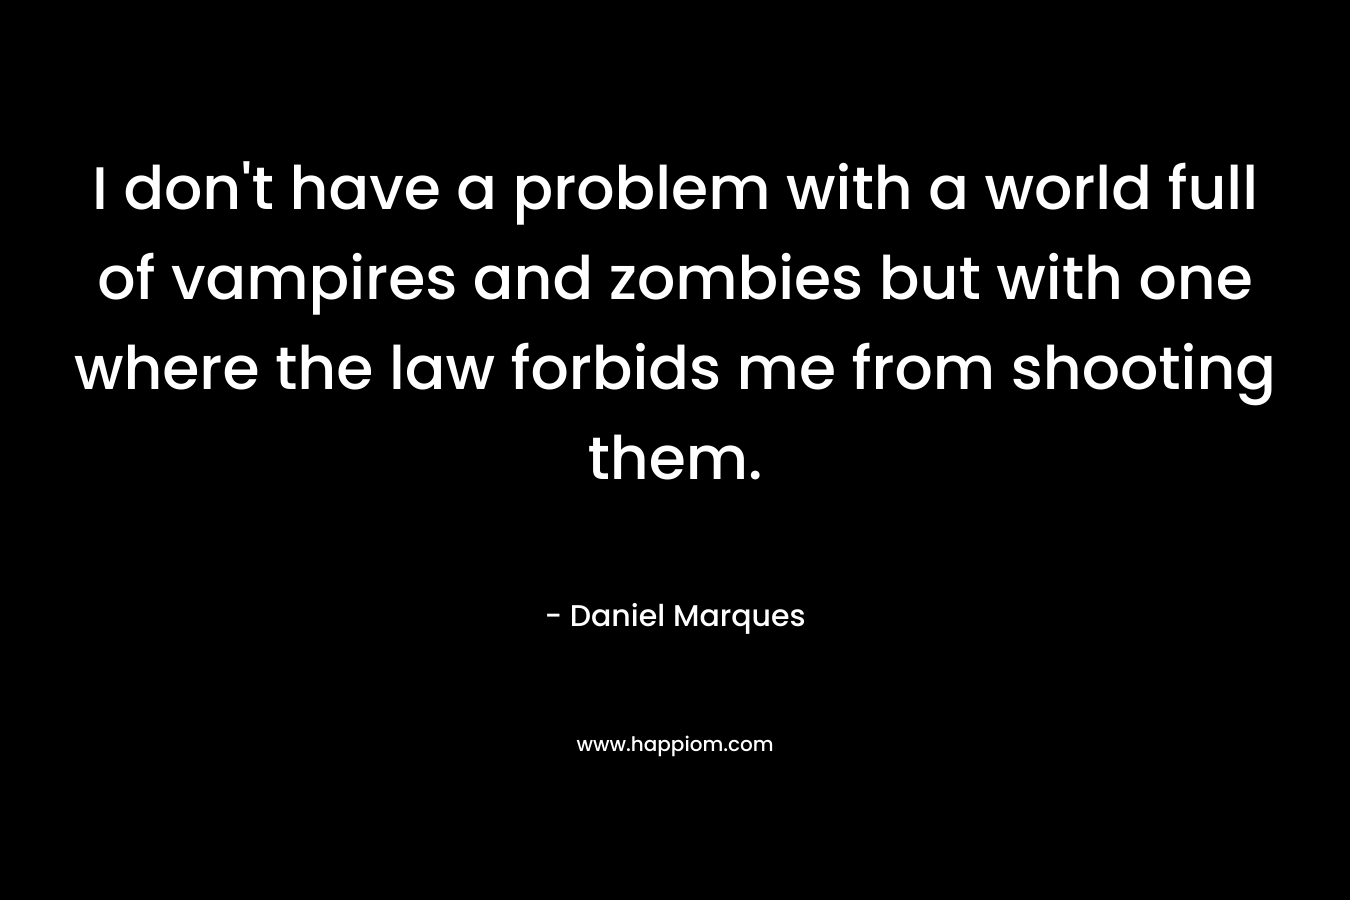 I don’t have a problem with a world full of vampires and zombies but with one where the law forbids me from shooting them. – Daniel Marques